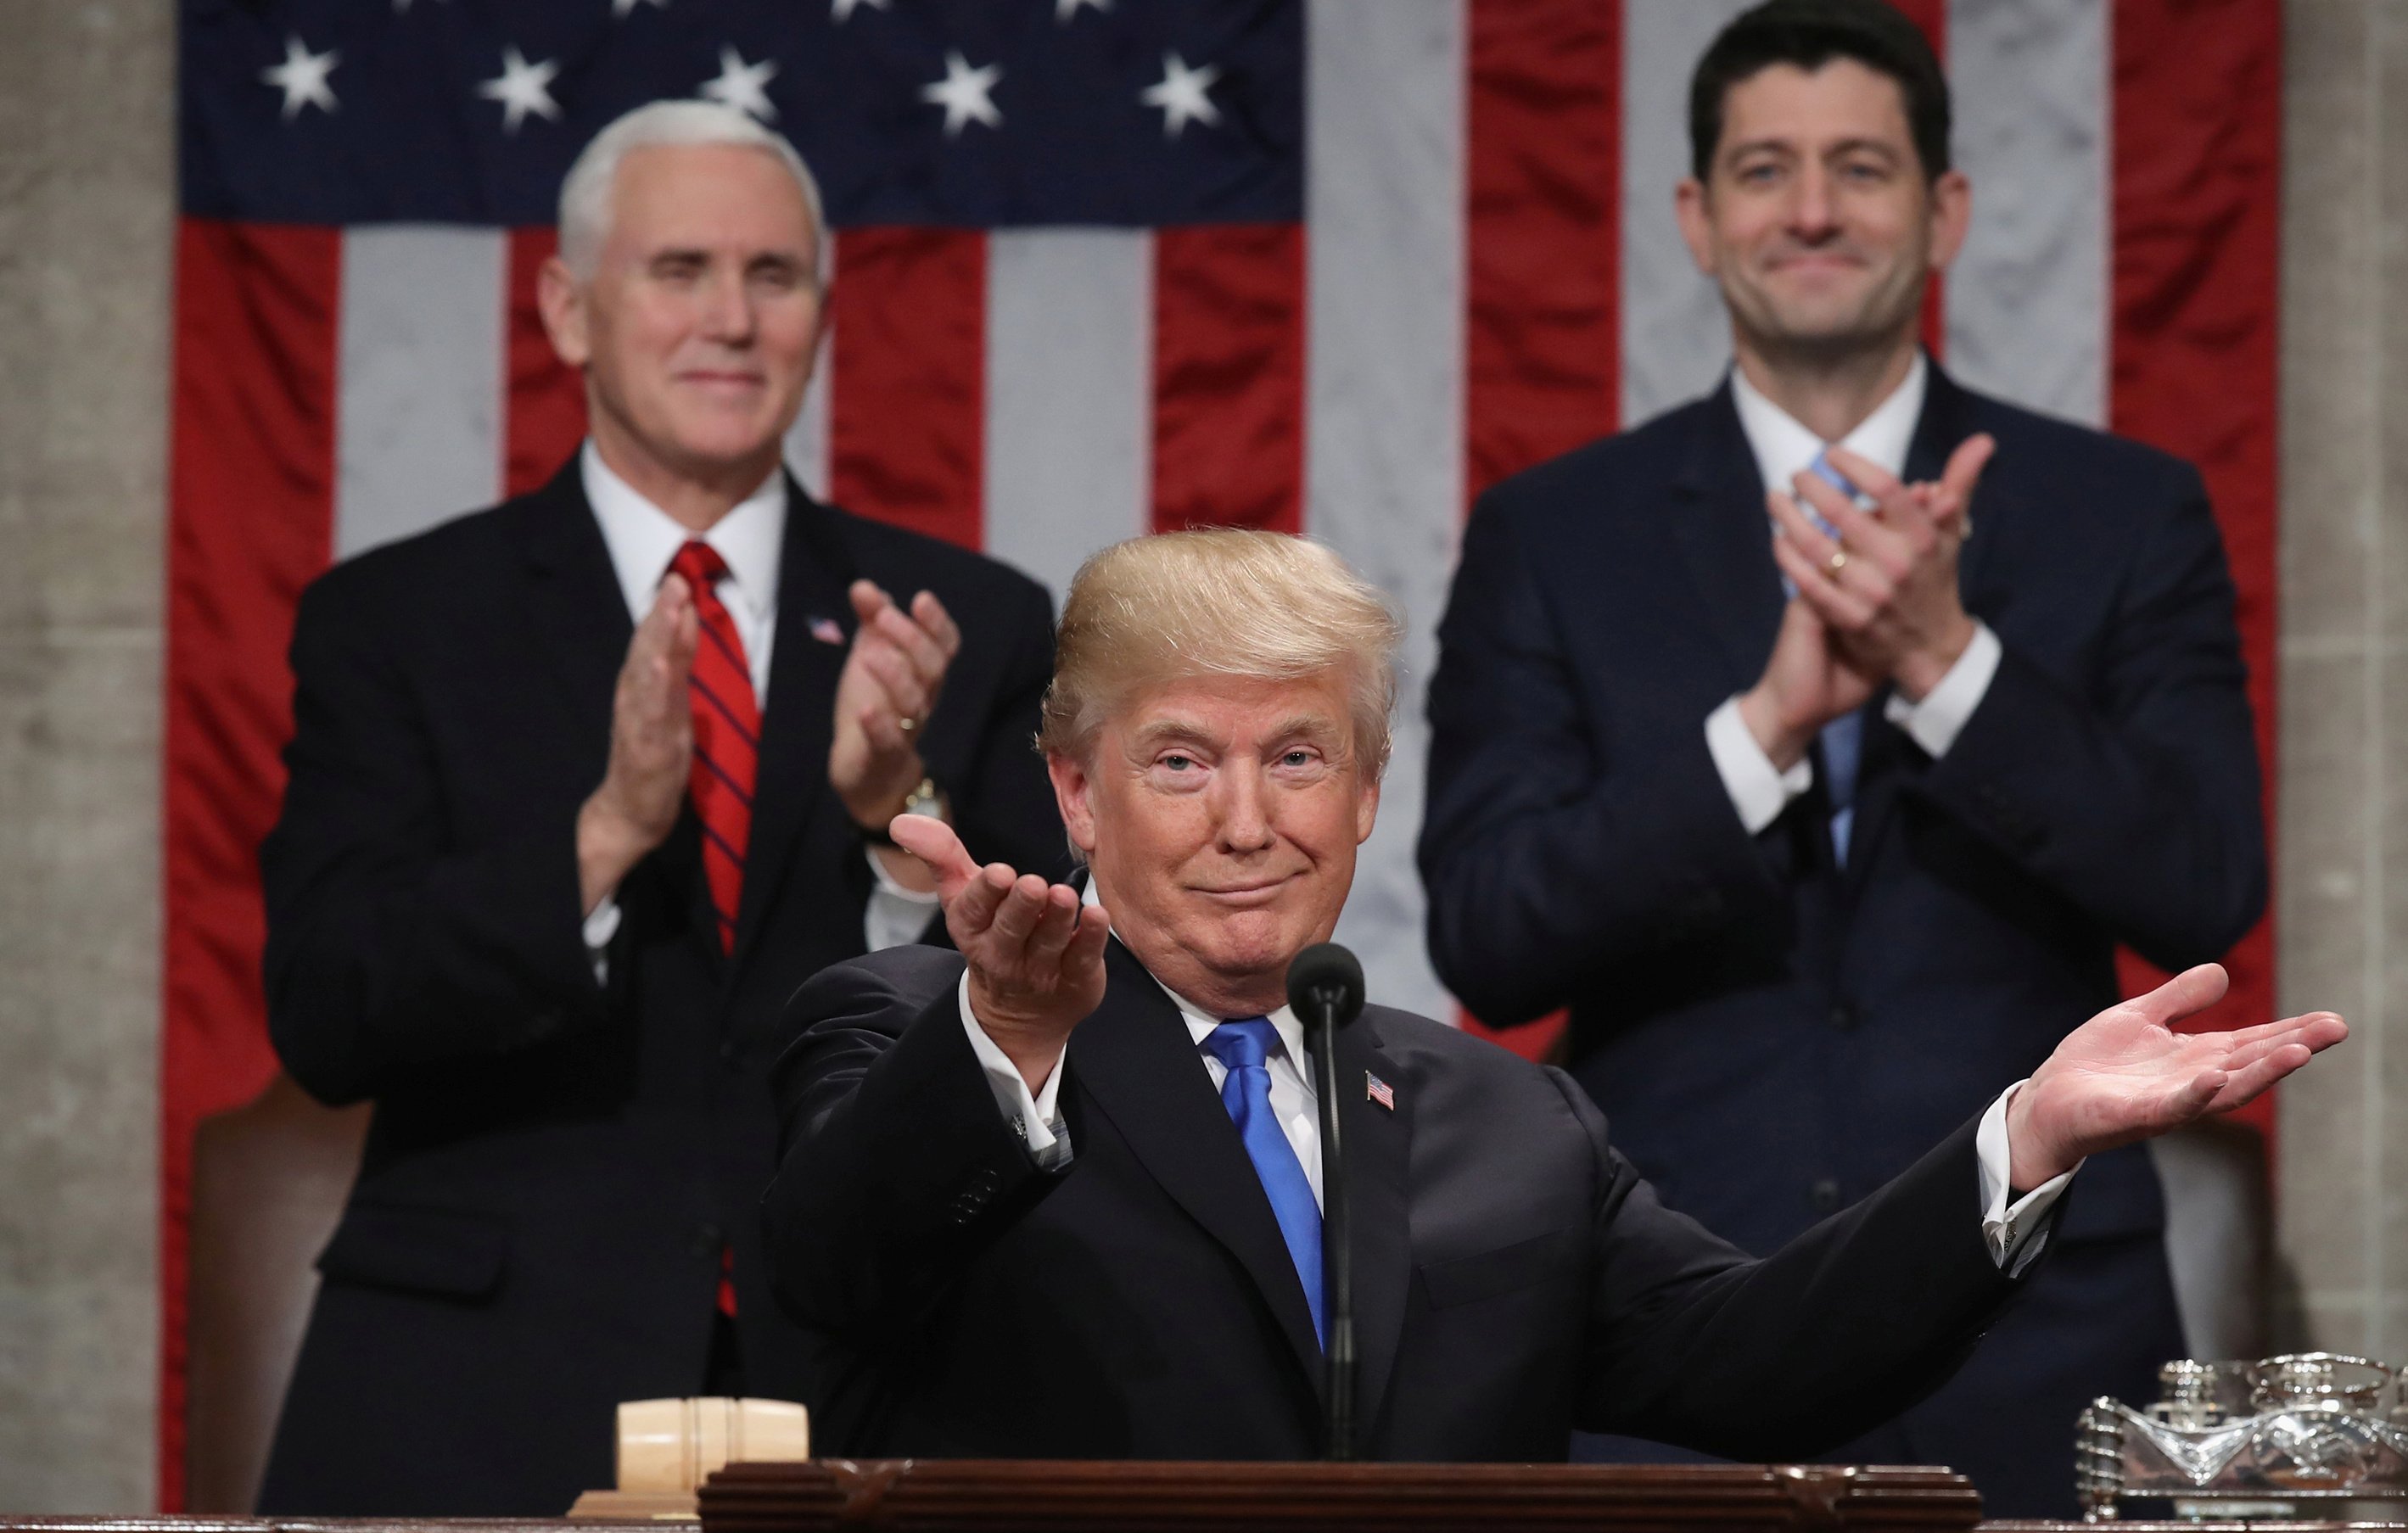 U.S. President Donald Trump delivers his first State of the Union address to a joint session of Congress inside the House Chamber on Capitol Hill in Washington, U.S., January 30, 2018. REUTERS/Win McNamee/Pool